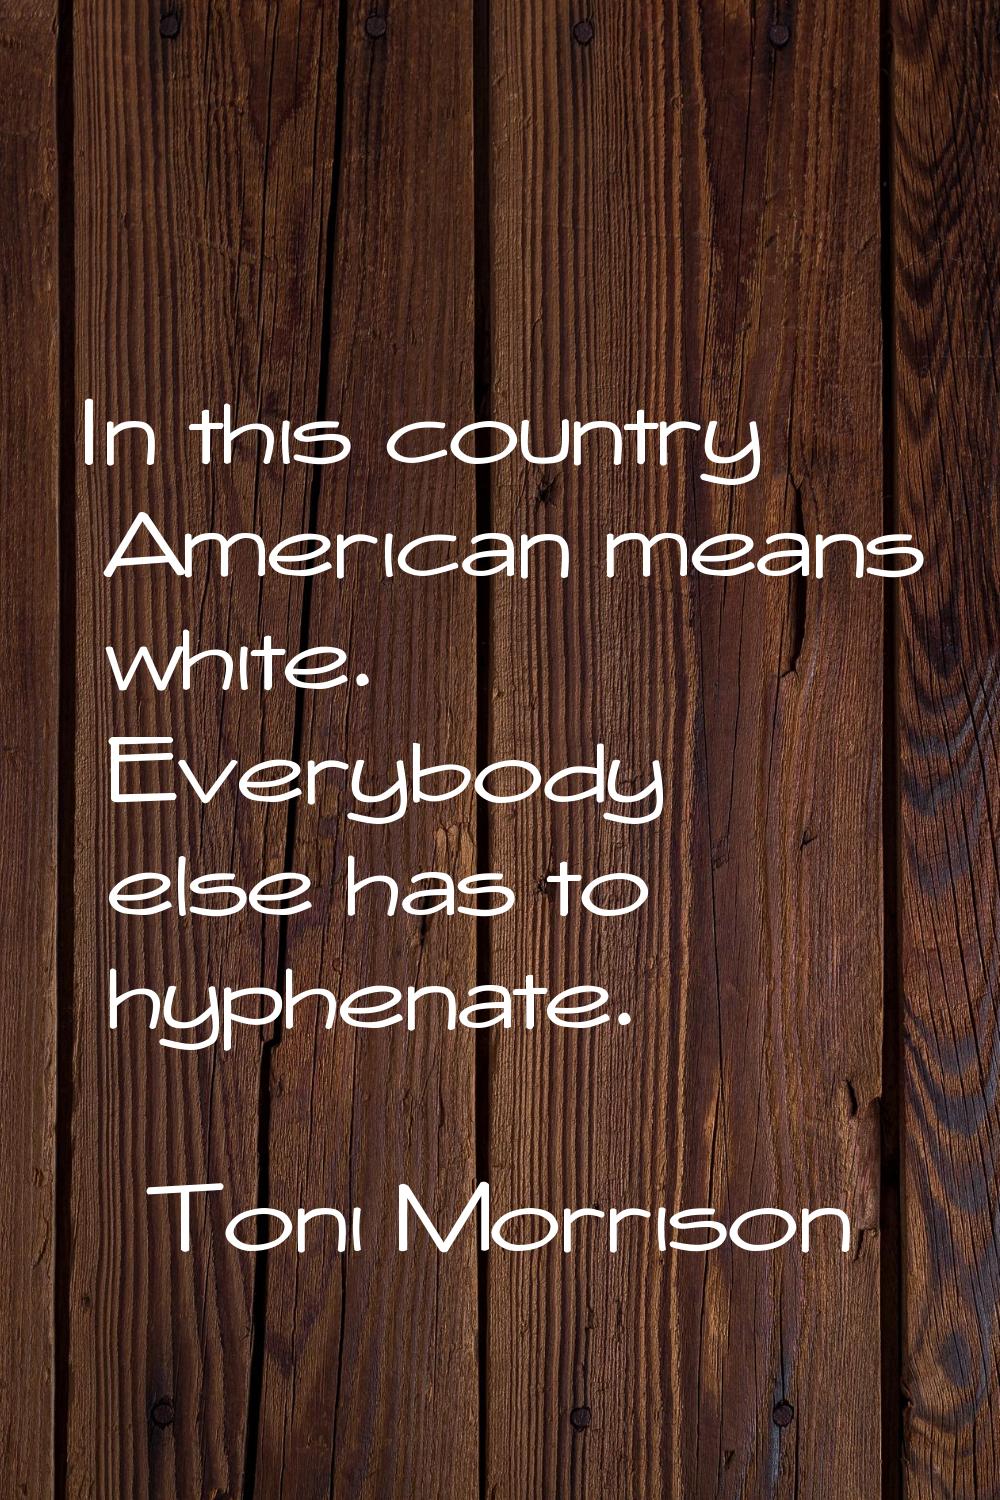 In this country American means white. Everybody else has to hyphenate.